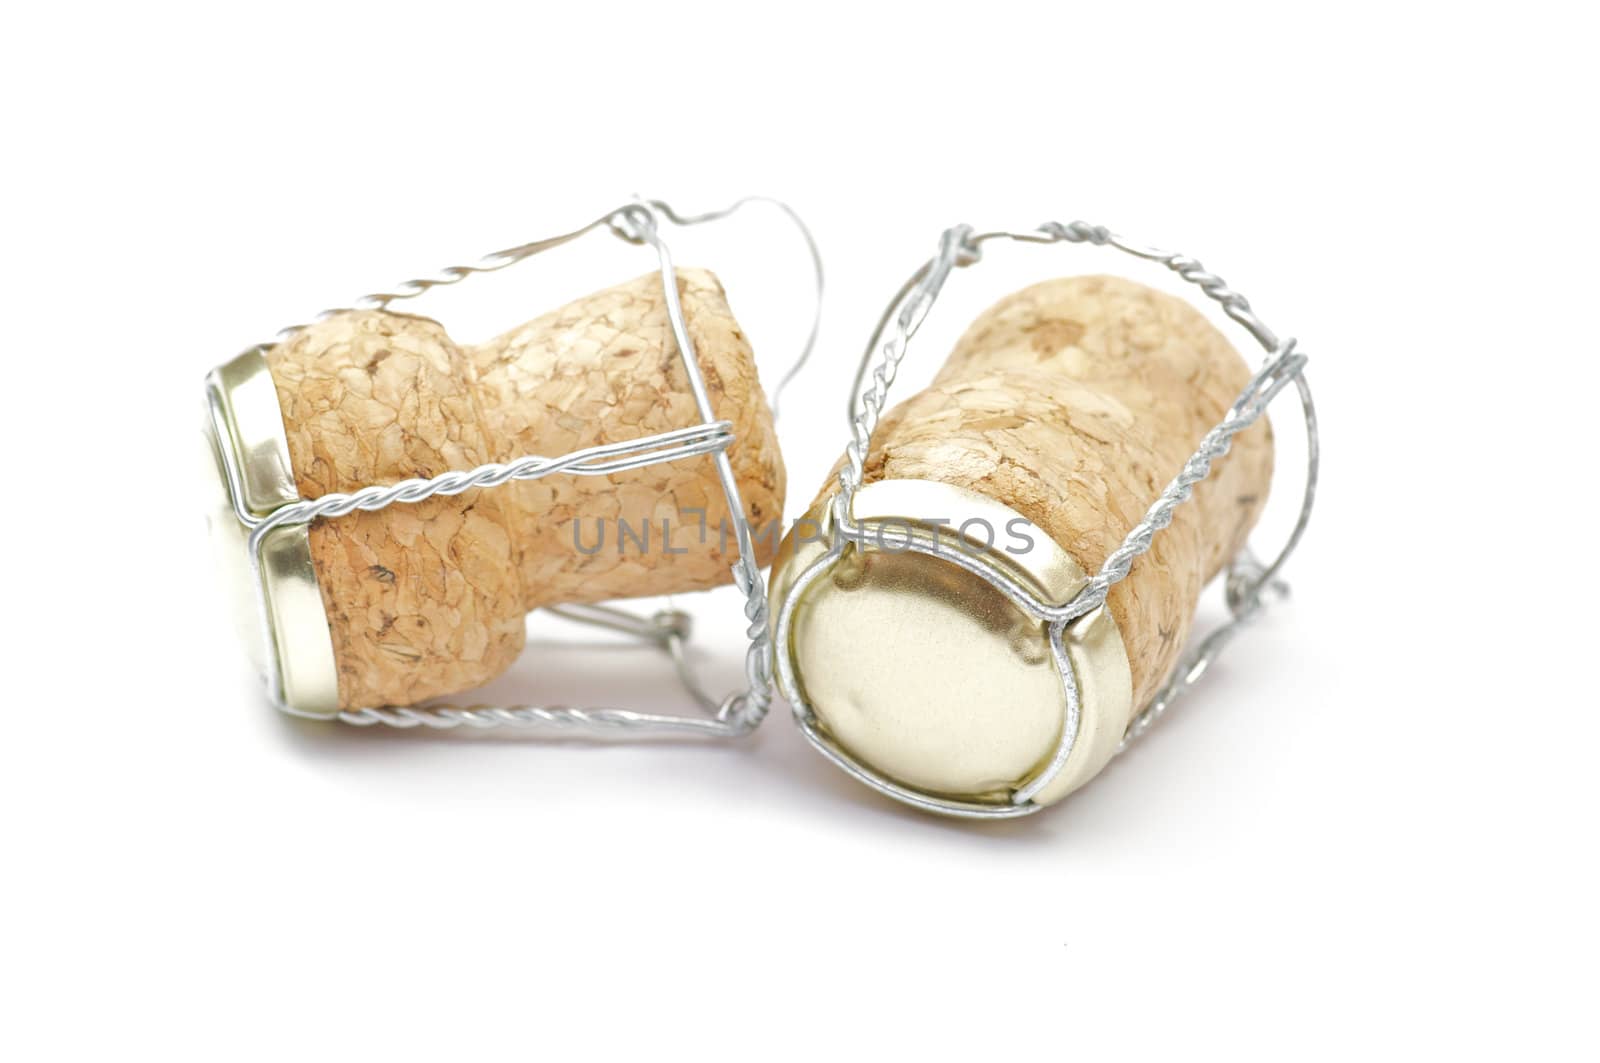 Two Cortical champagne corks on white background